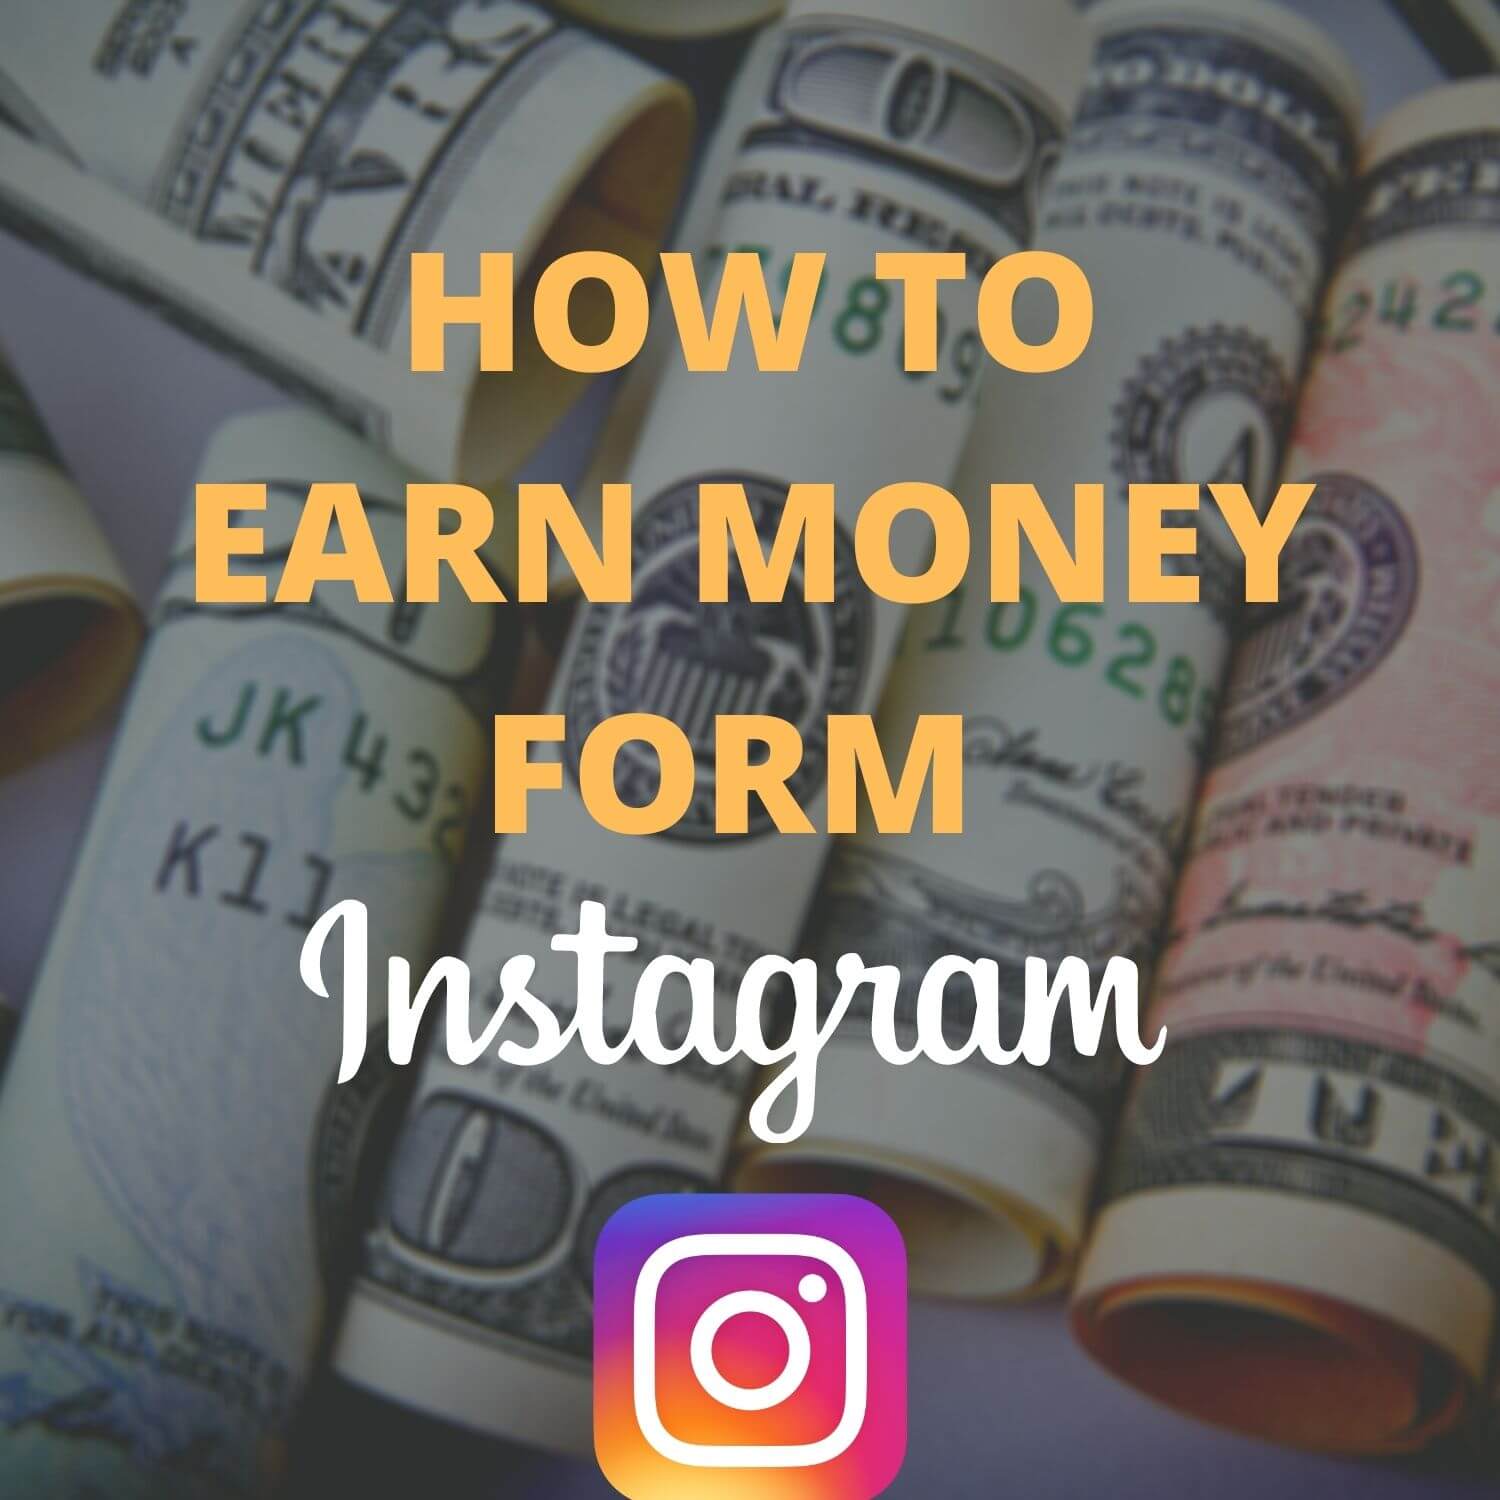 HOW TO EARN MONEY FORM INSTAGRAM?